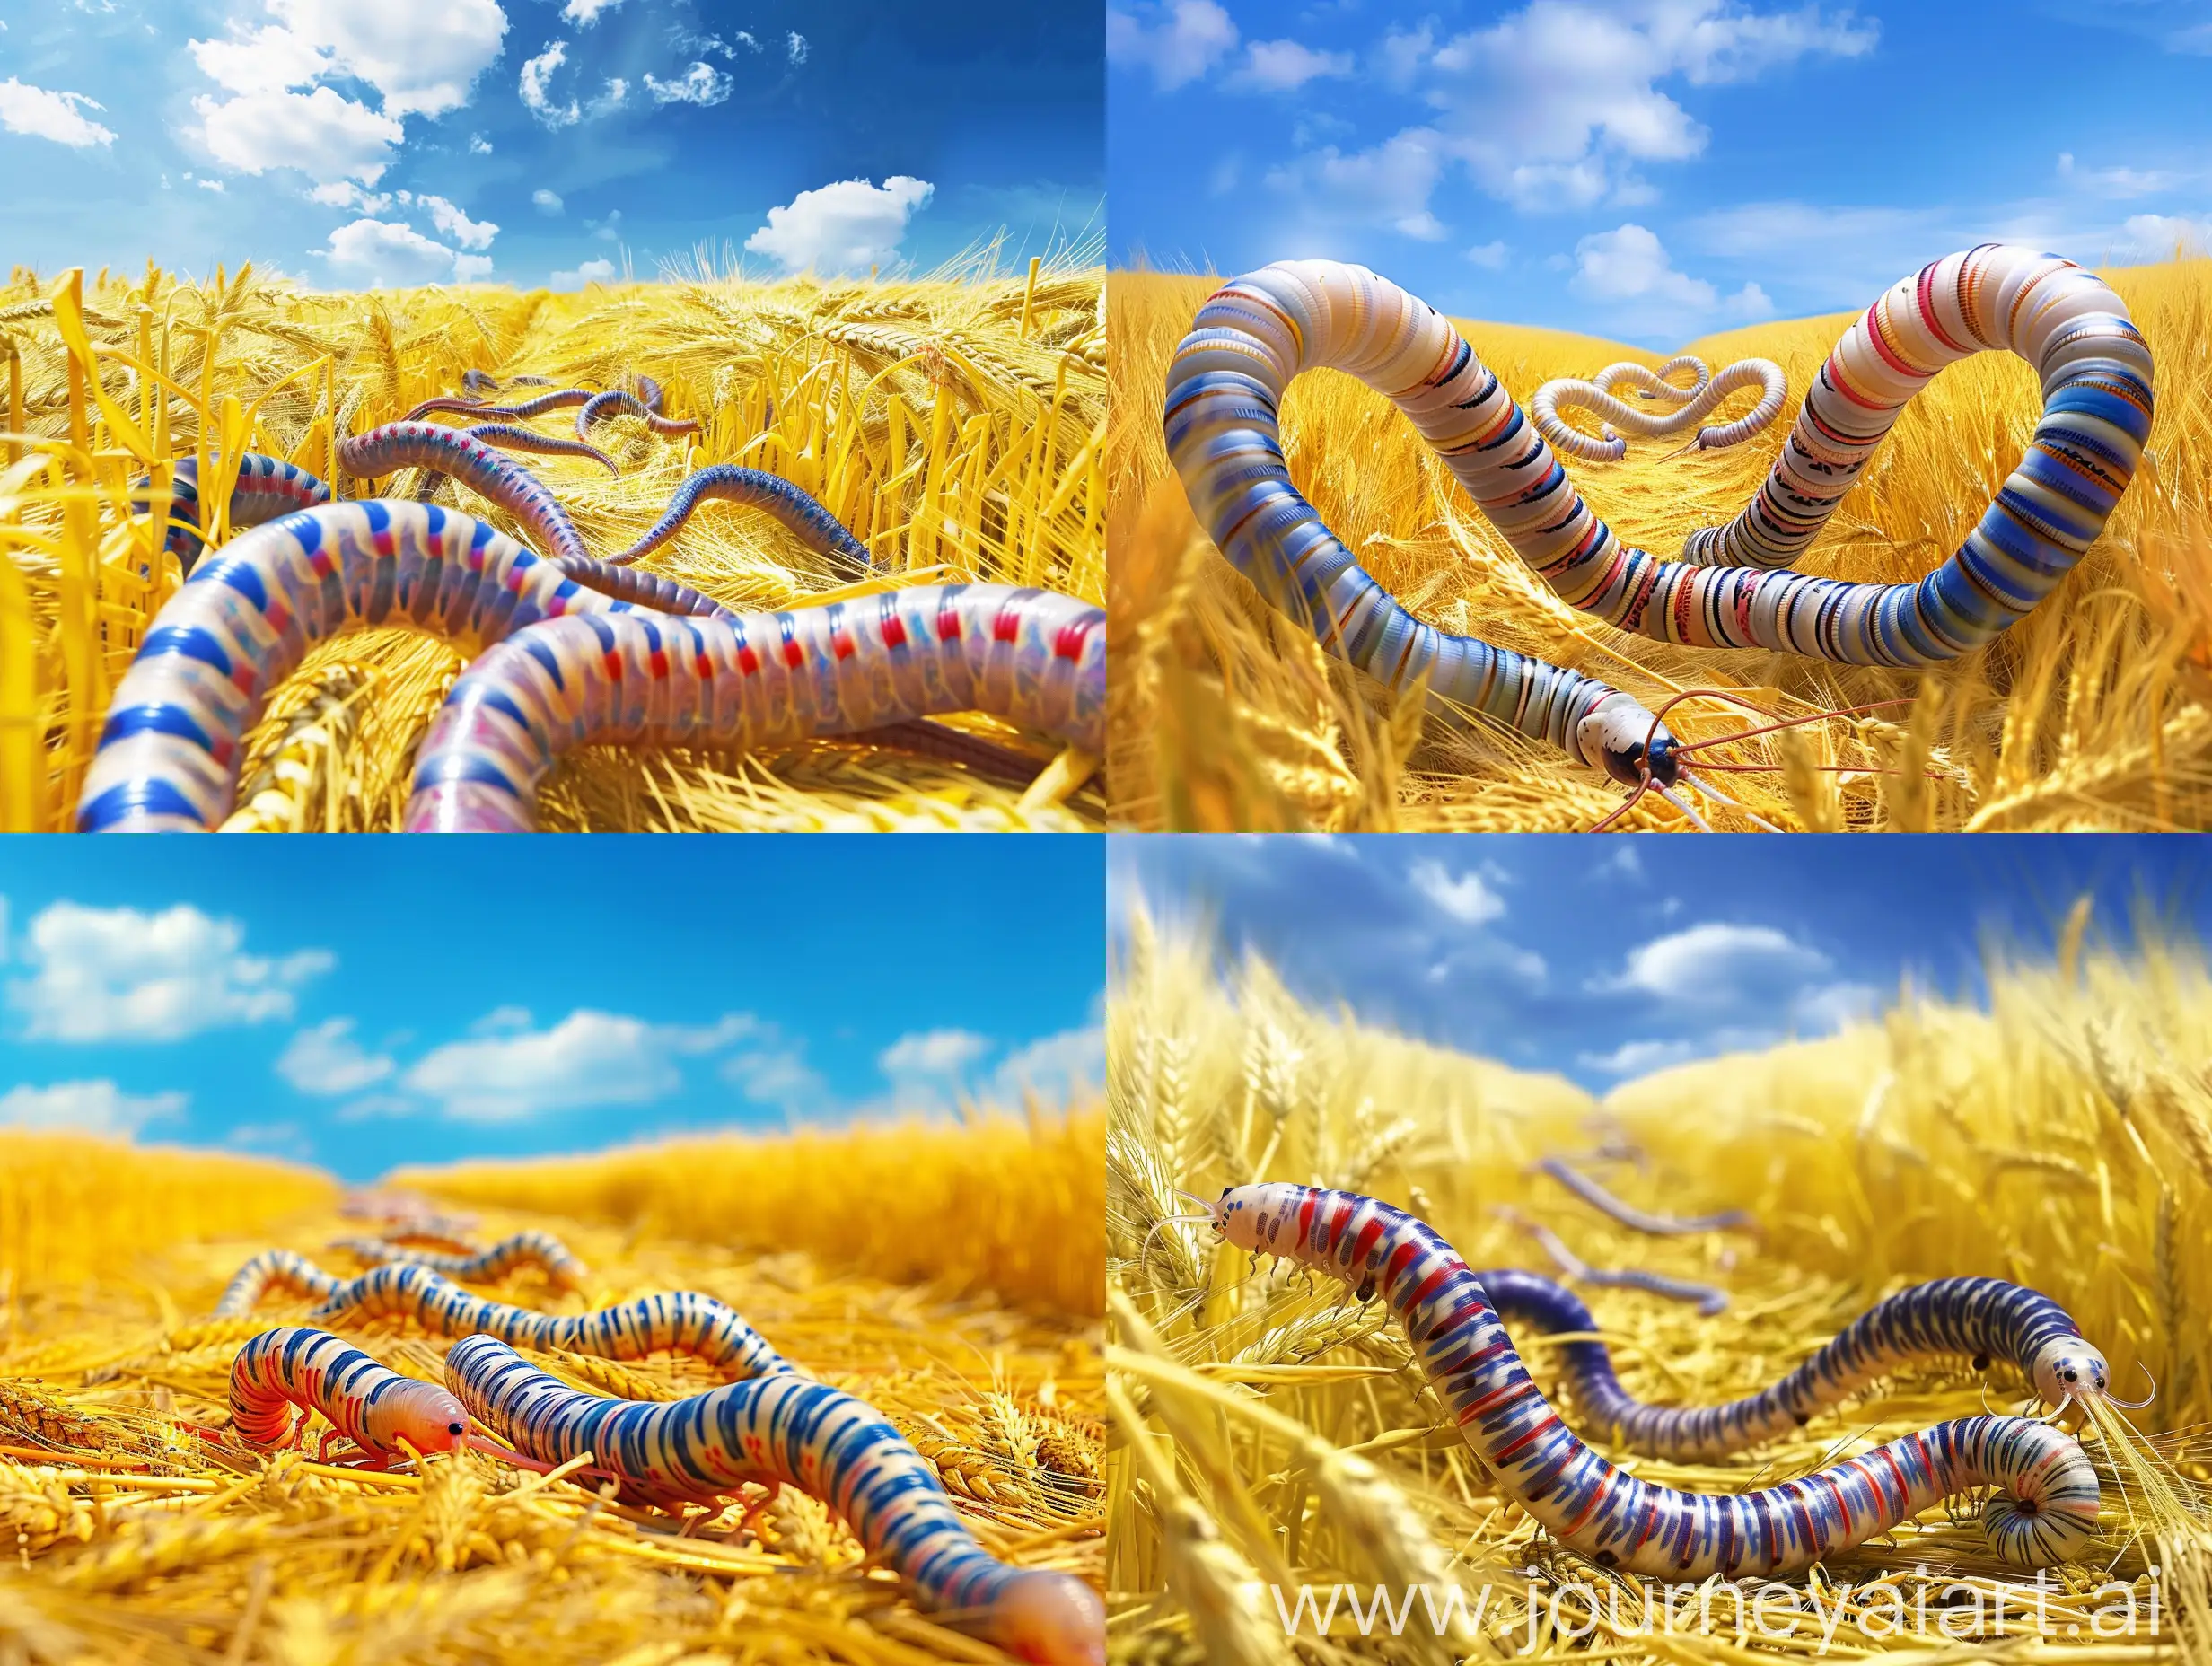 worms with white, blue and red stripes crawl through a yellow wheat field under a blue sky